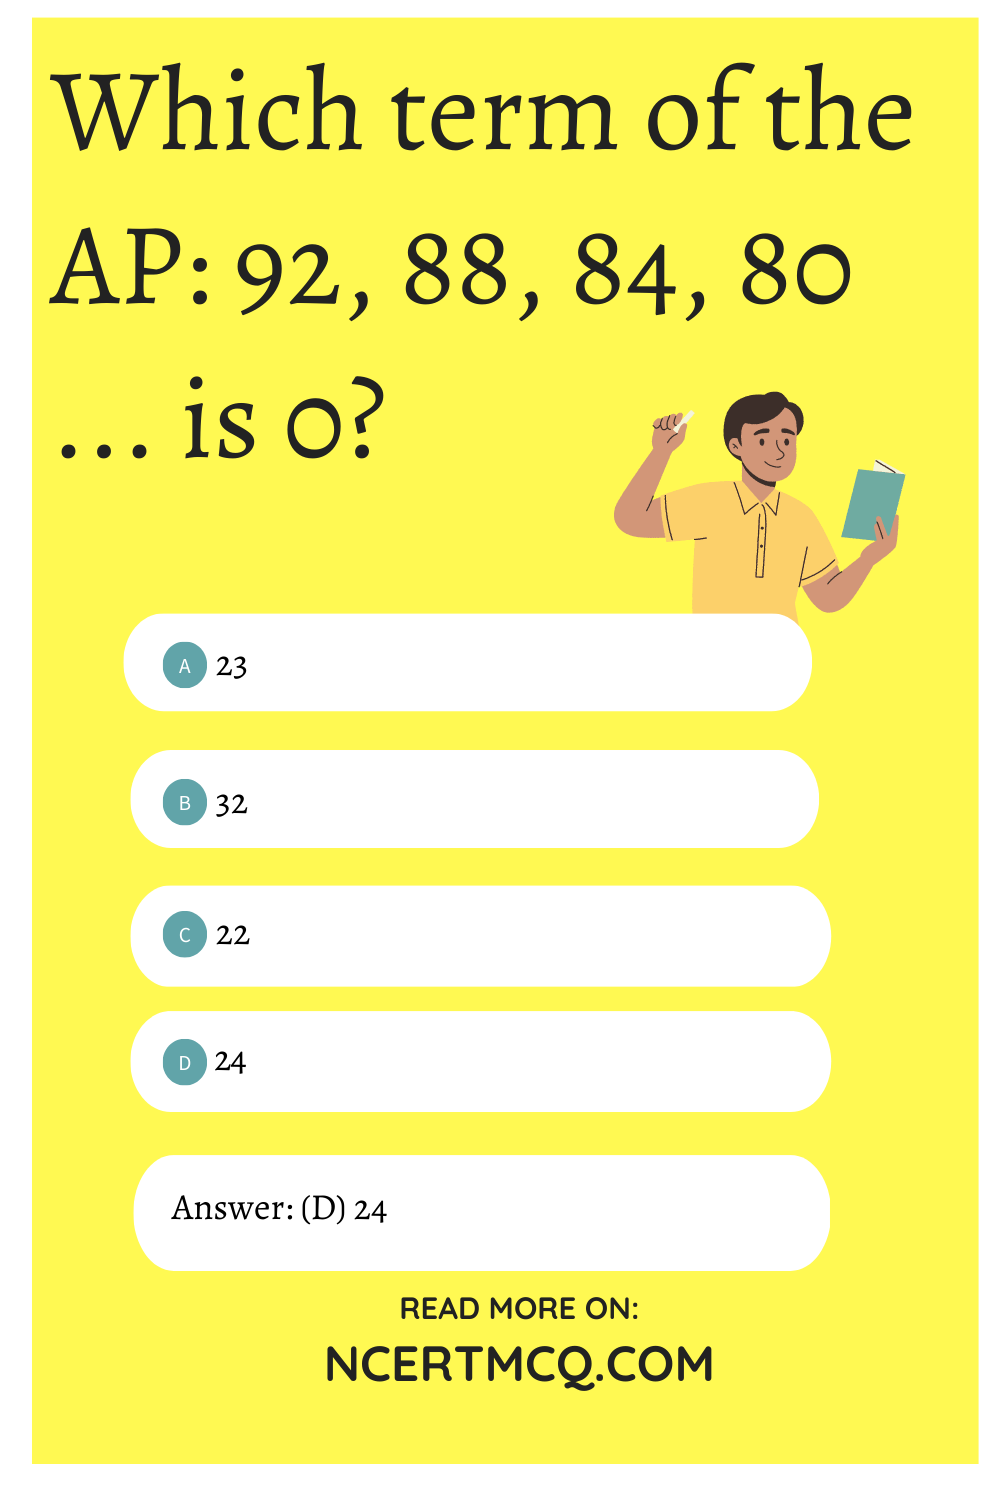 Which term of the AP: 92, 88, 84, 80 ... is 0?